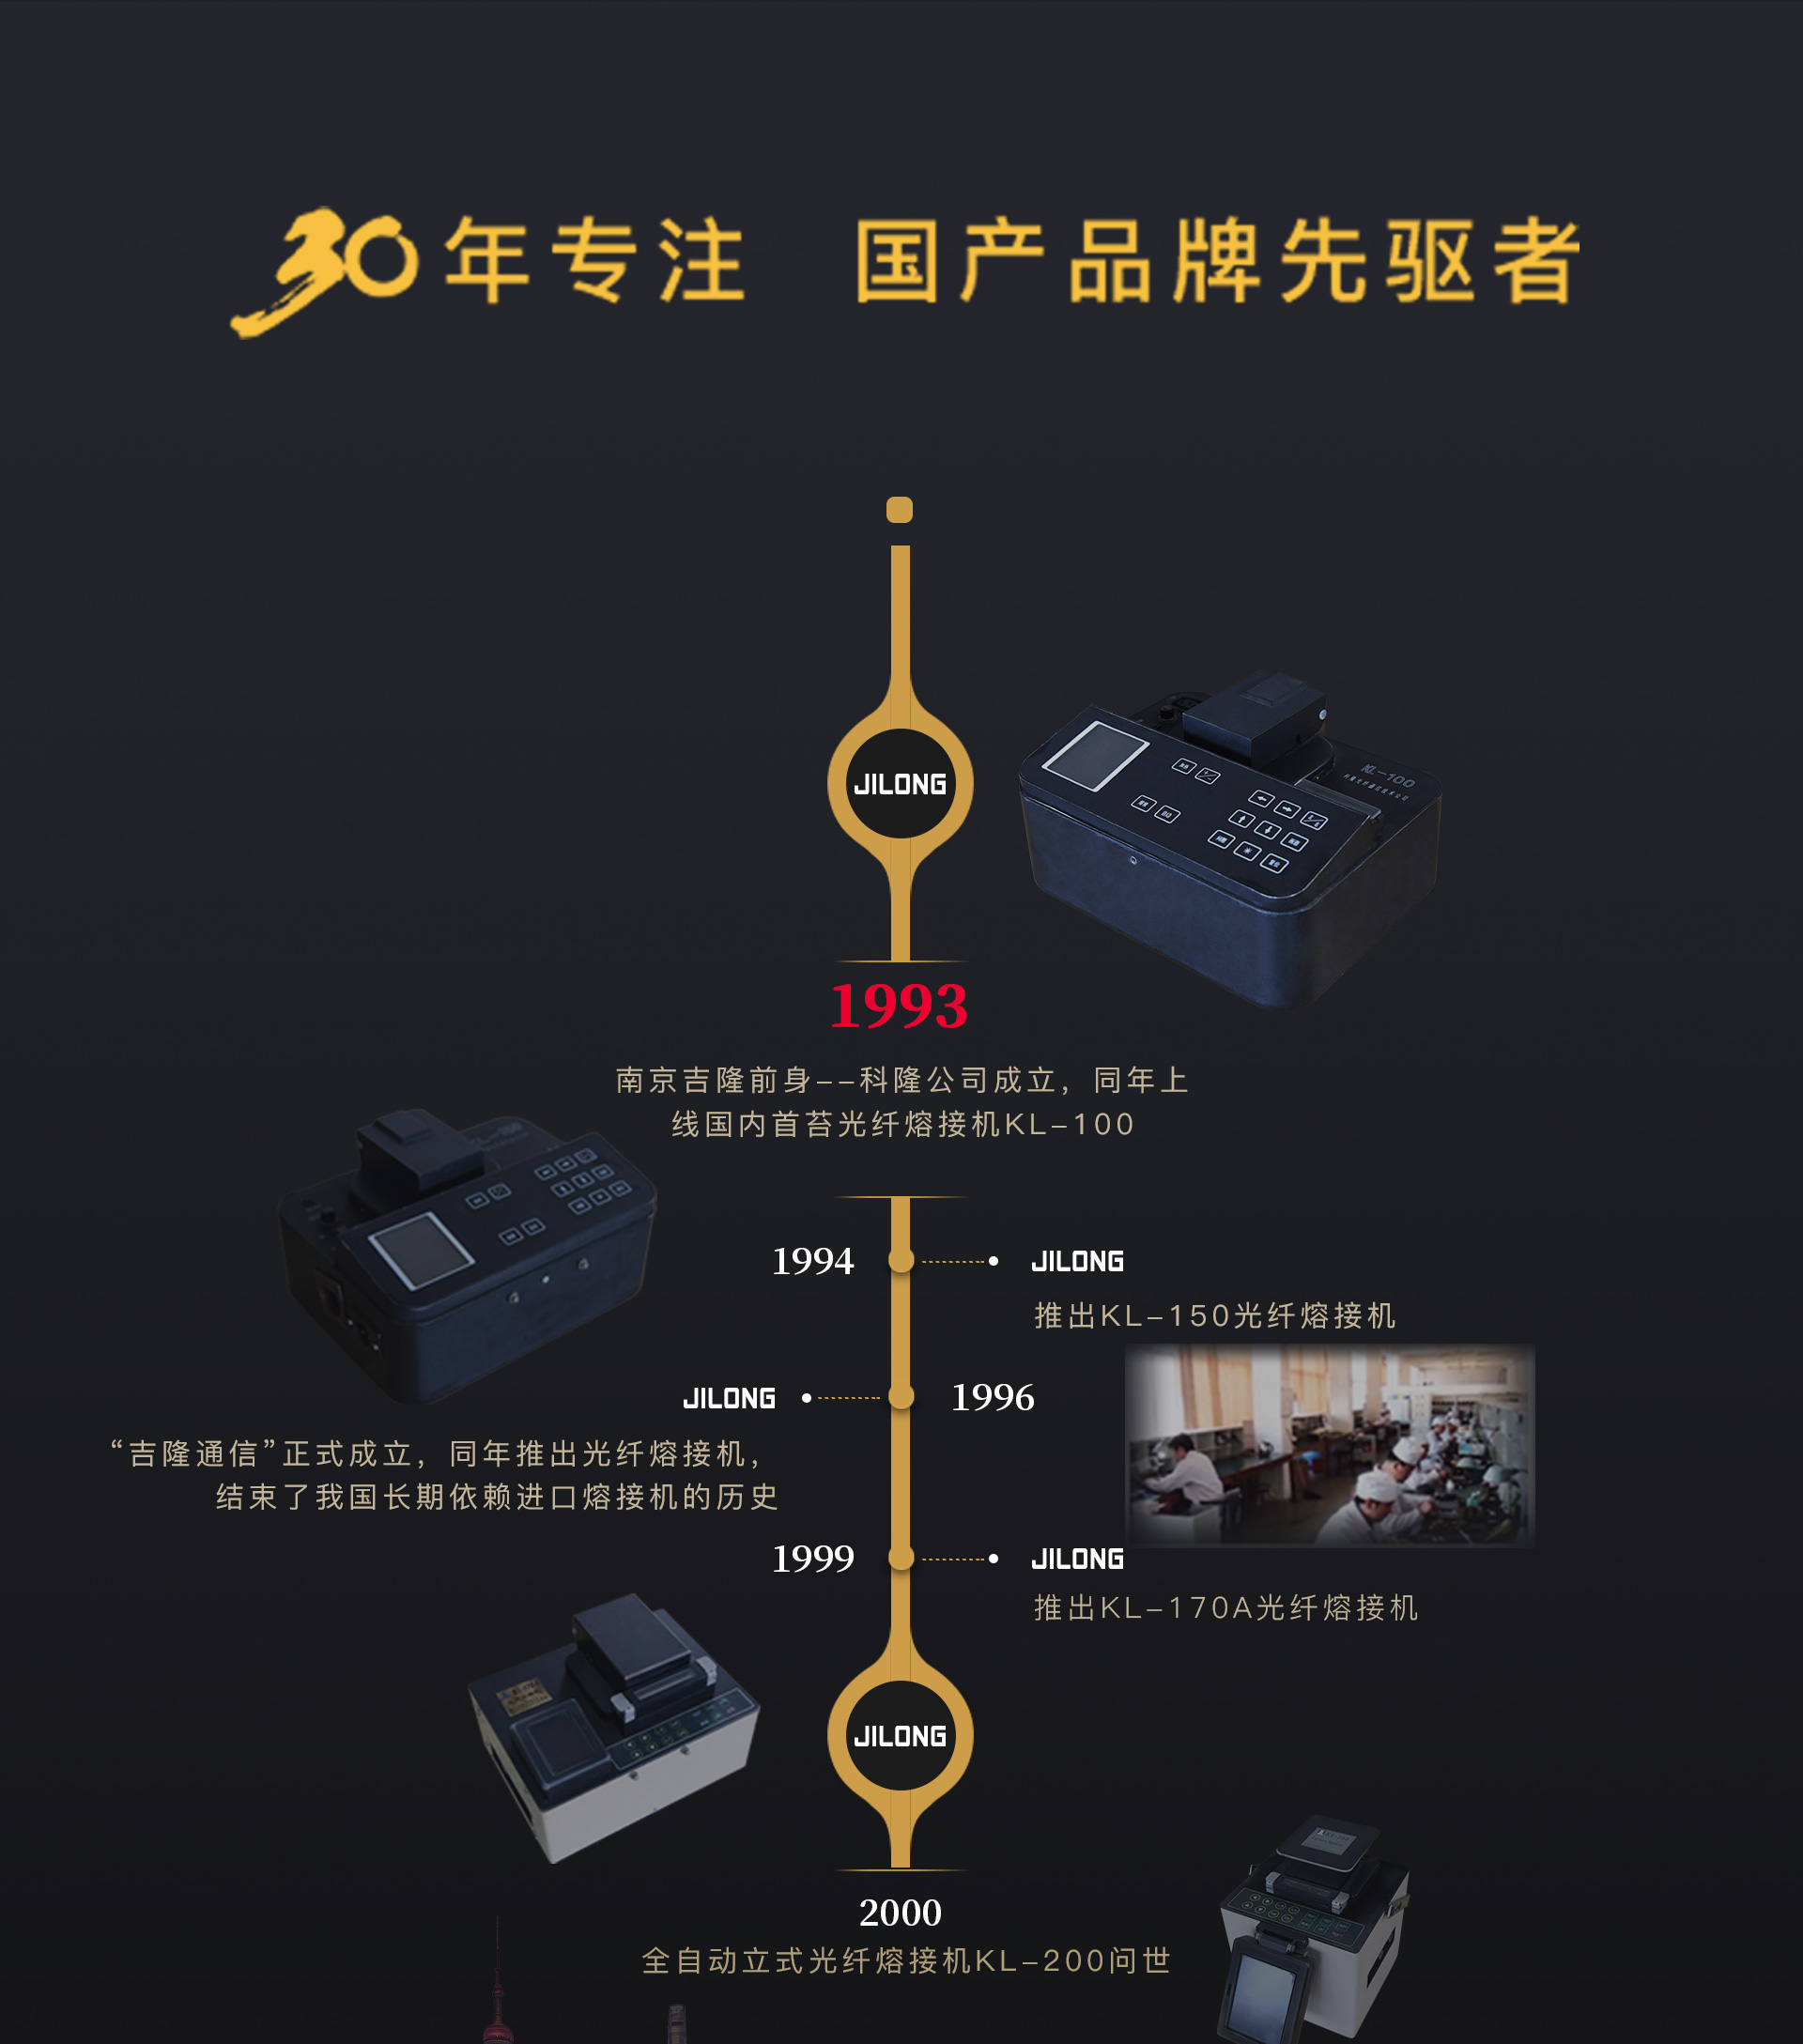 Jilong 30 years of R & D and manufacturing experience